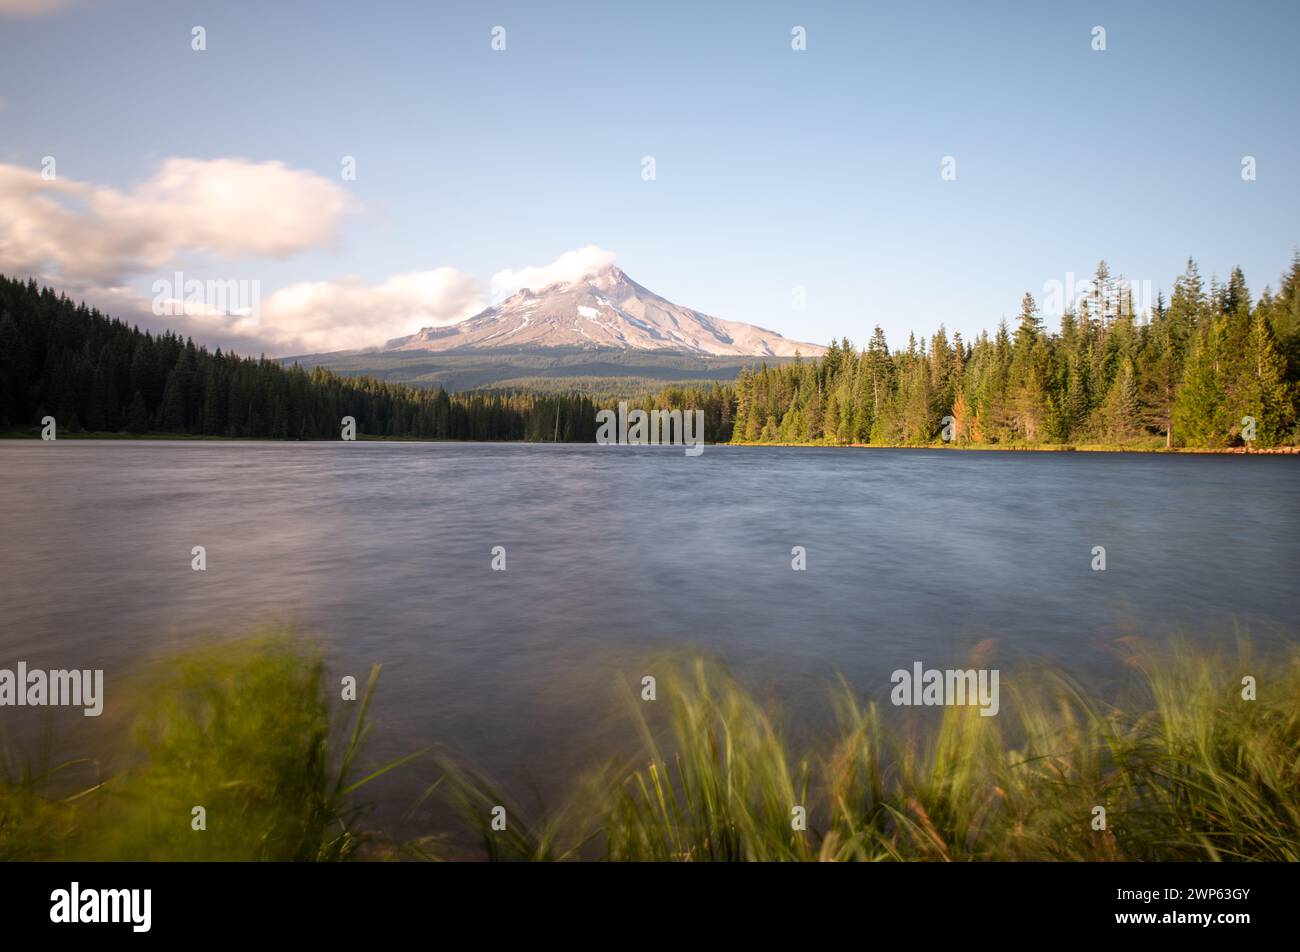 A beautiful lake surrounded by a forest with Mount Hood in the background on a sunny day with blue skies in long exposure. Stock Photo